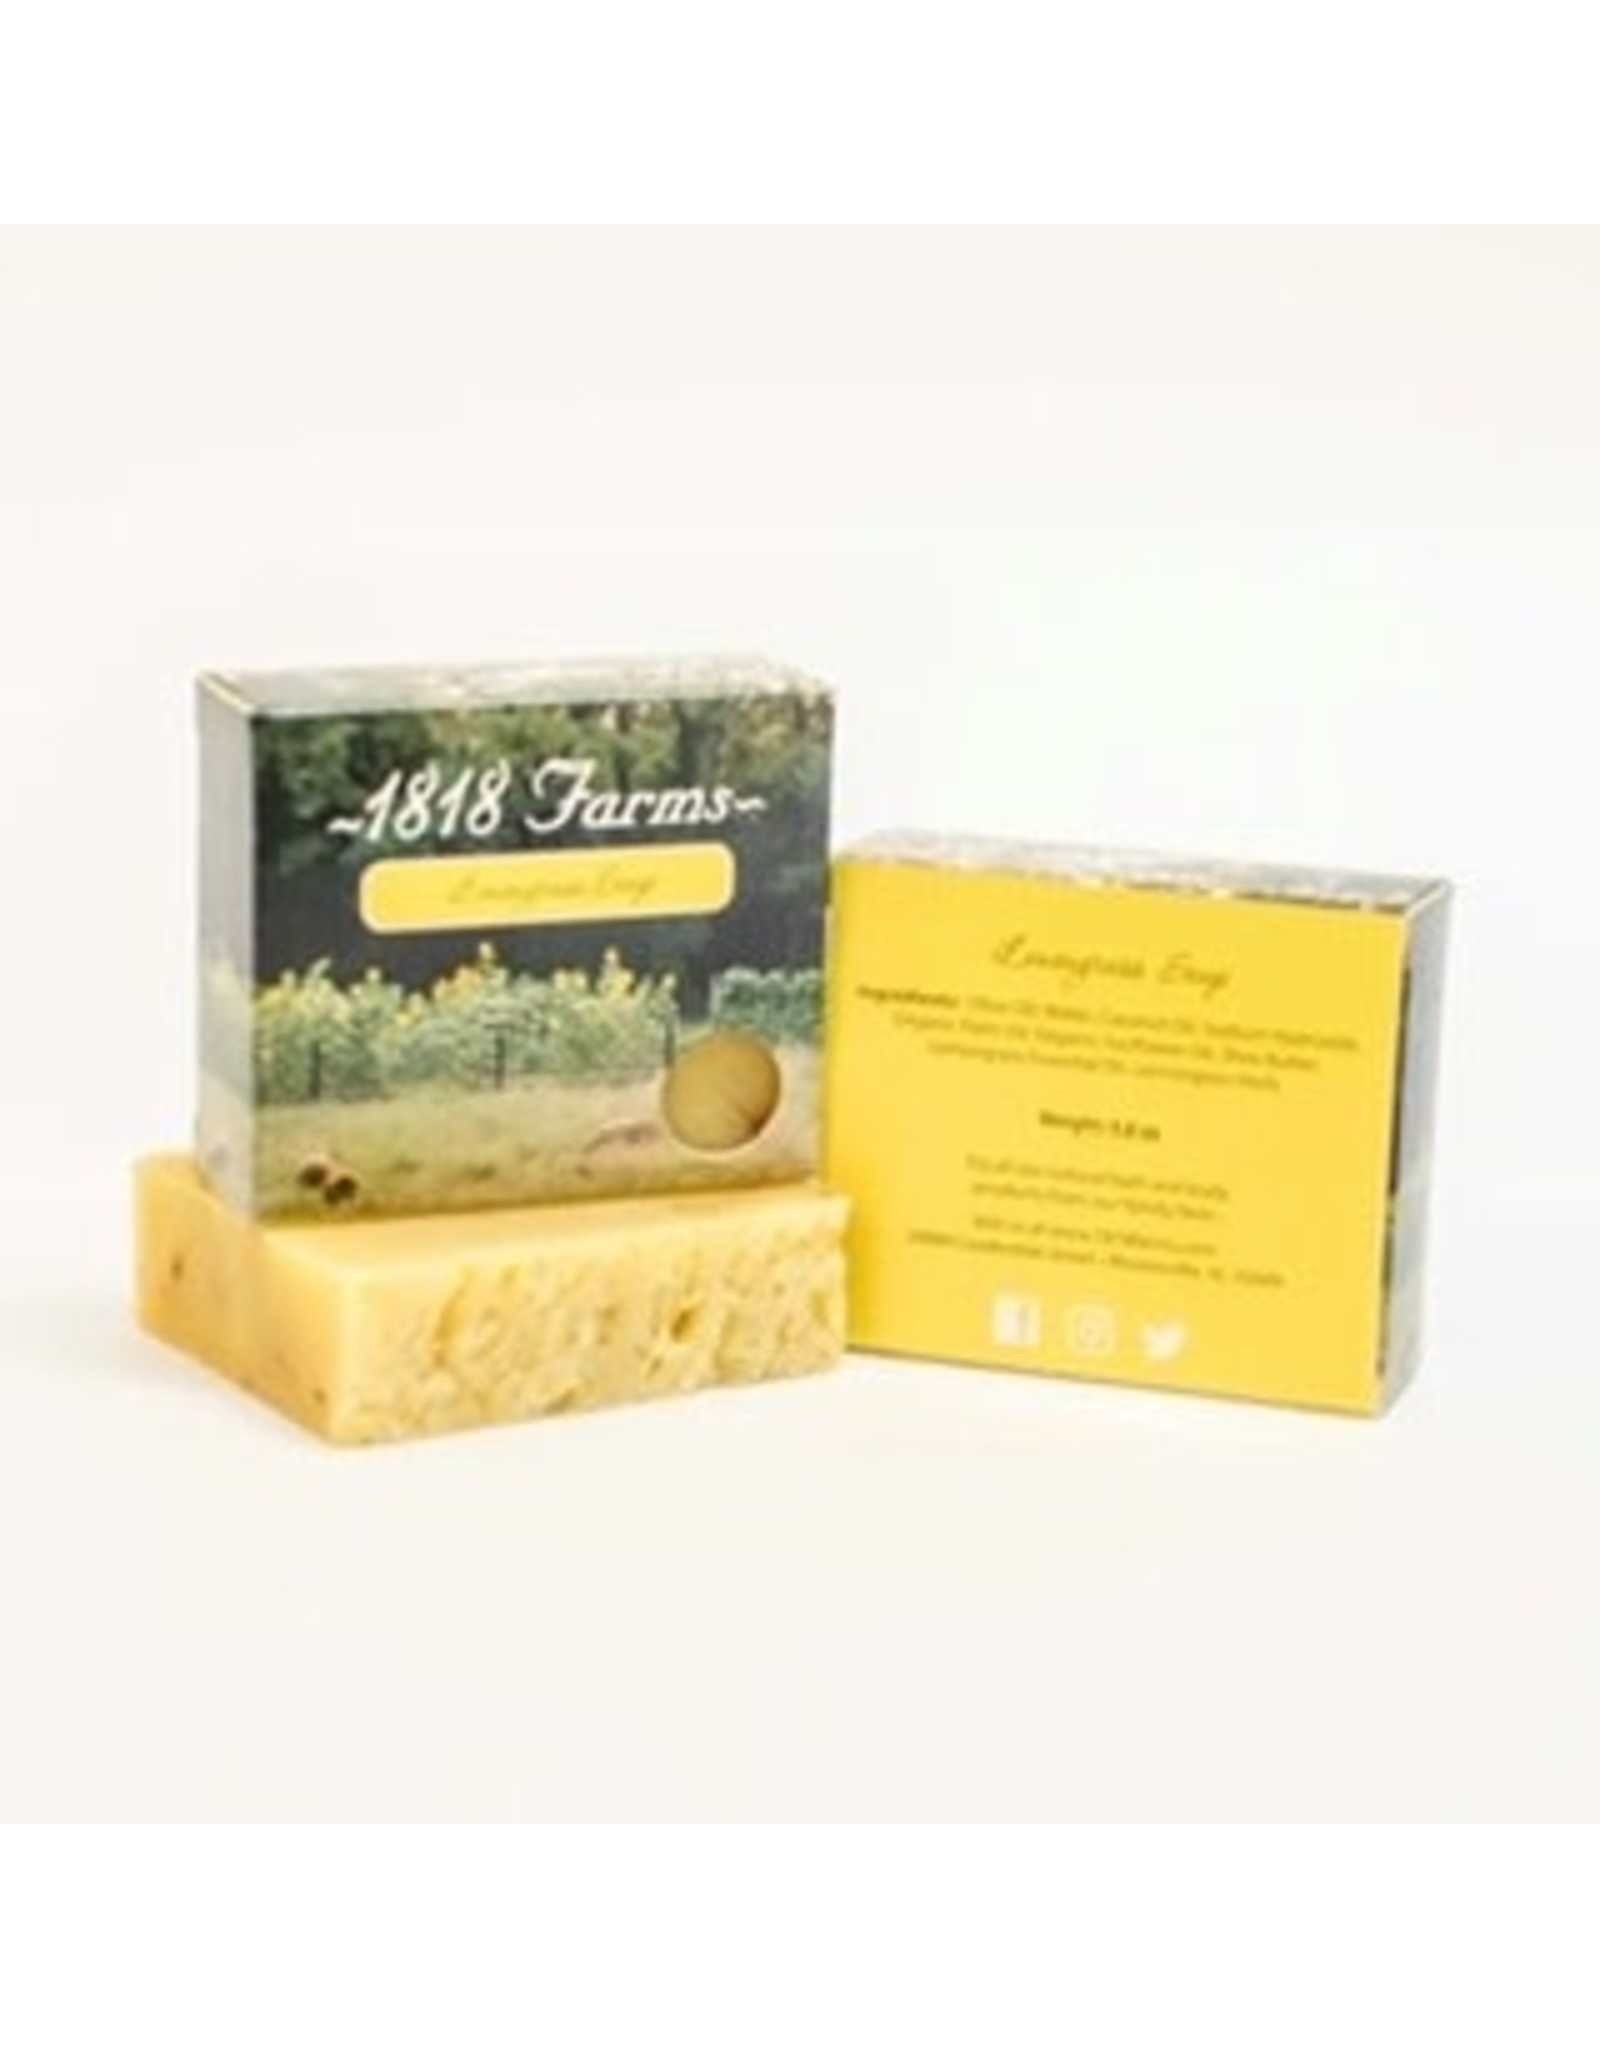 1818 Farms Hand Crafted Soap